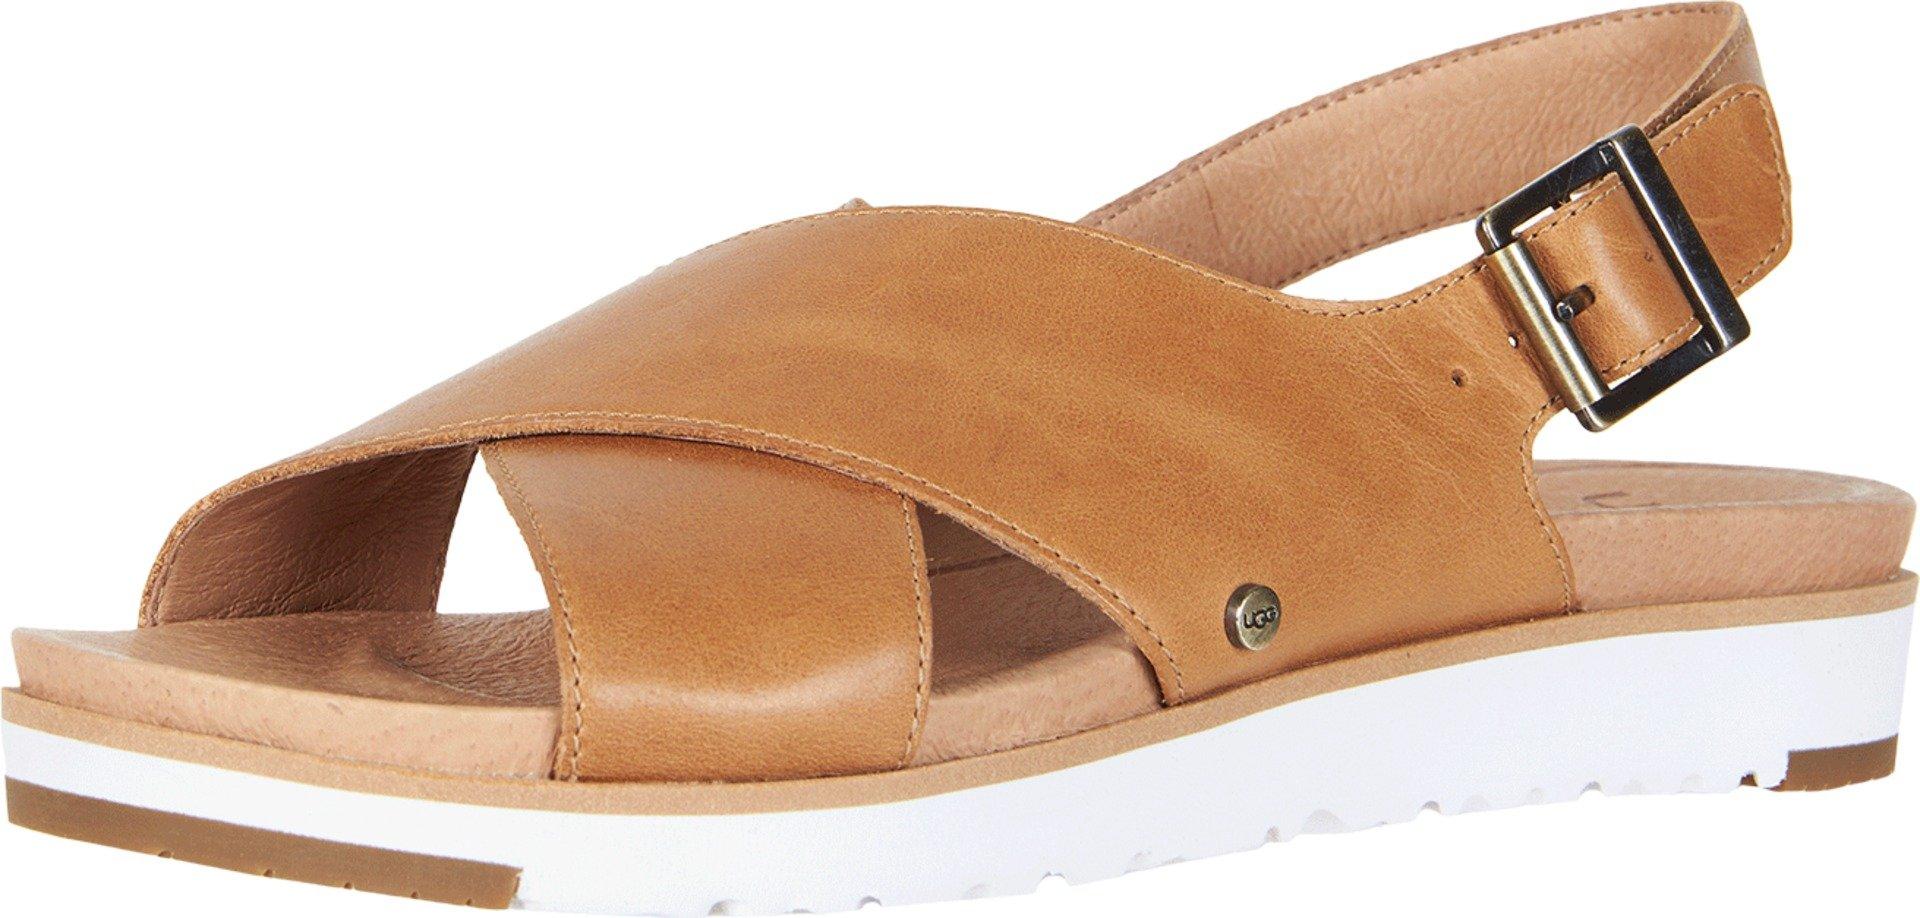 Ugg Kamile Sandal Almond Luxembourg, SAVE 49% - online-pmo.com